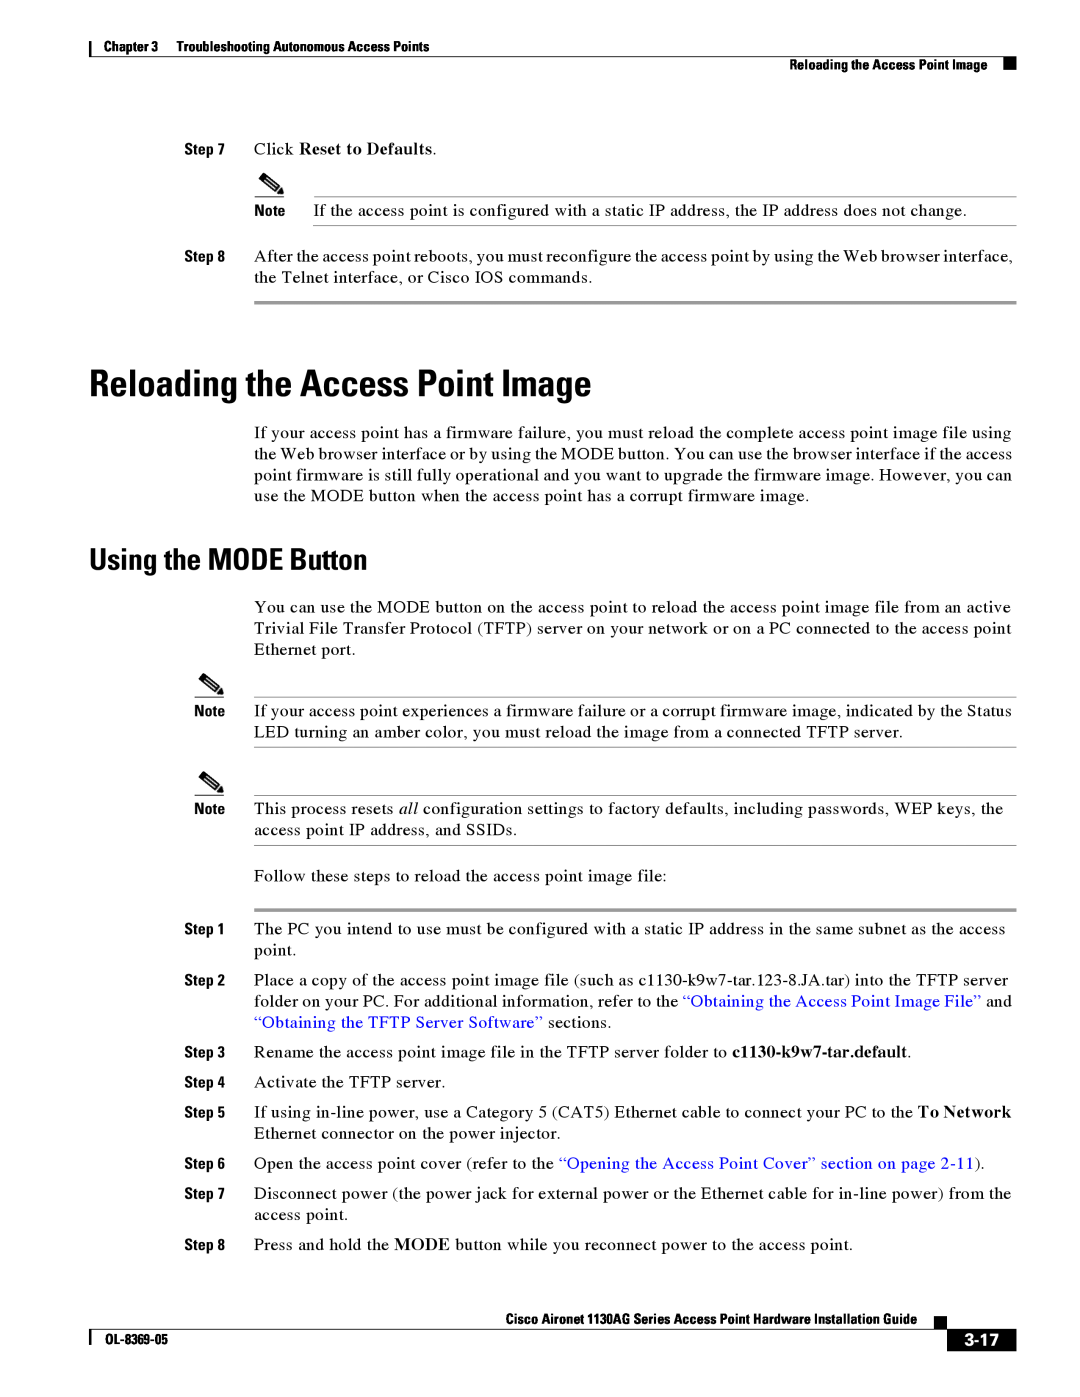 Cisco Systems 1130AG manual Reloading the Access Point Image, Using the MODE Button, Click Reset to Defaults, 3-17 